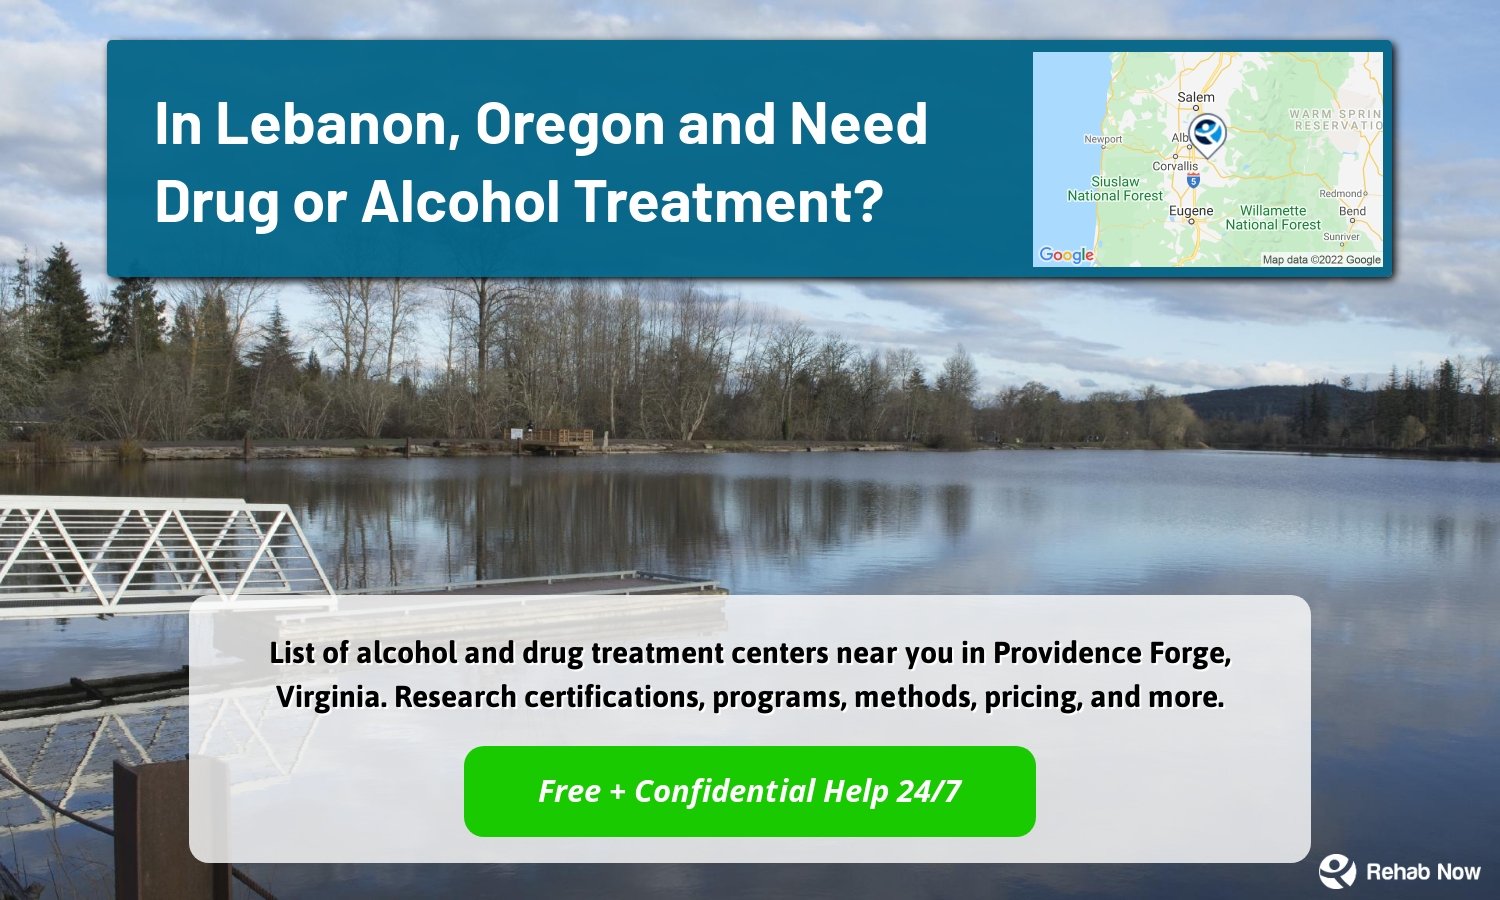 List of alcohol and drug treatment centers near you in Providence Forge, Virginia. Research certifications, programs, methods, pricing, and more.